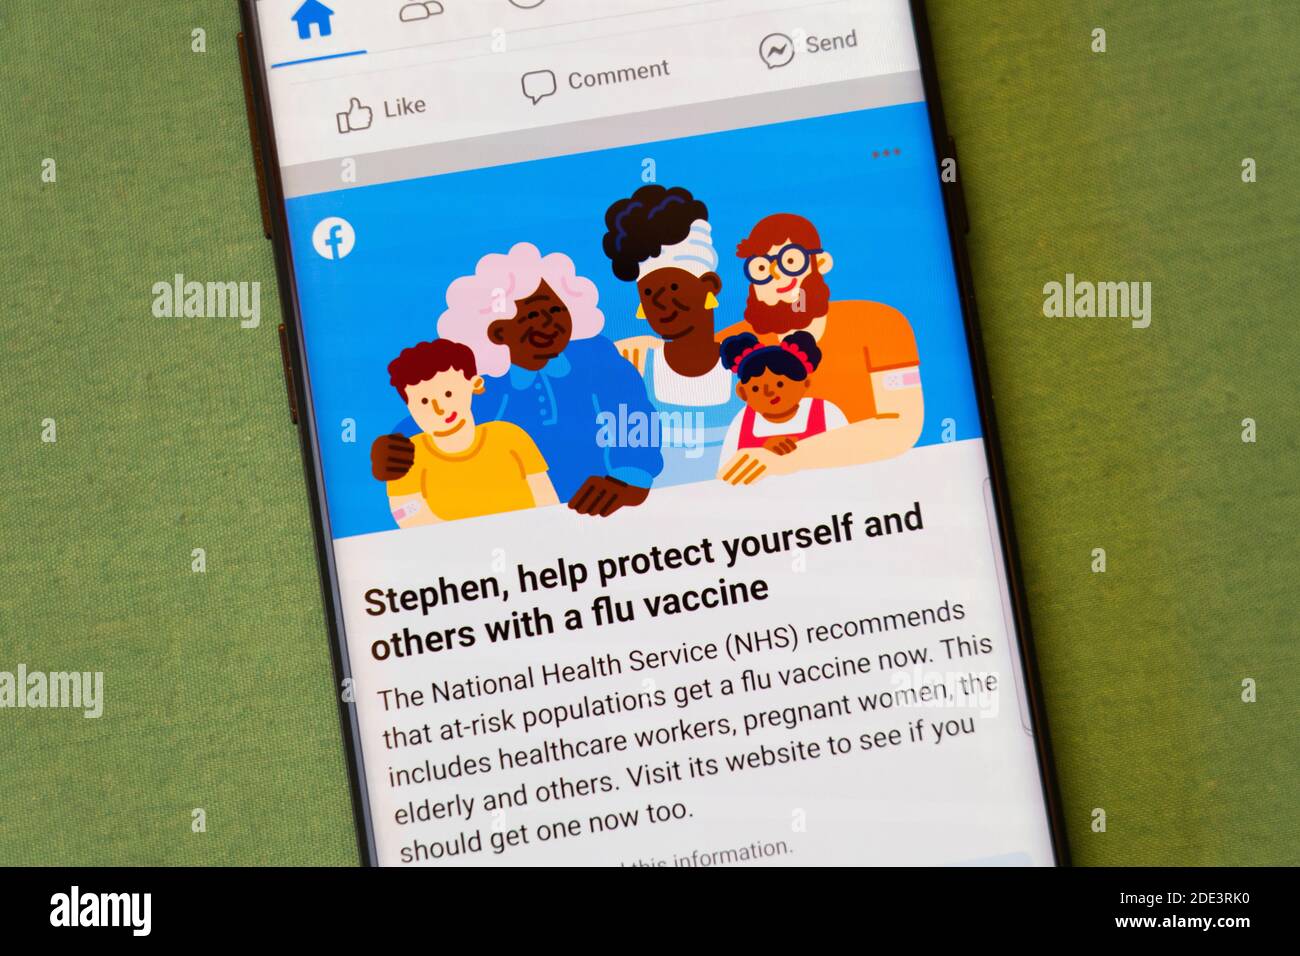 A NHS (National Health Service) advertisement on Facebook for people to take the flu vaccine on a smartphone screen, UK Stock Photo